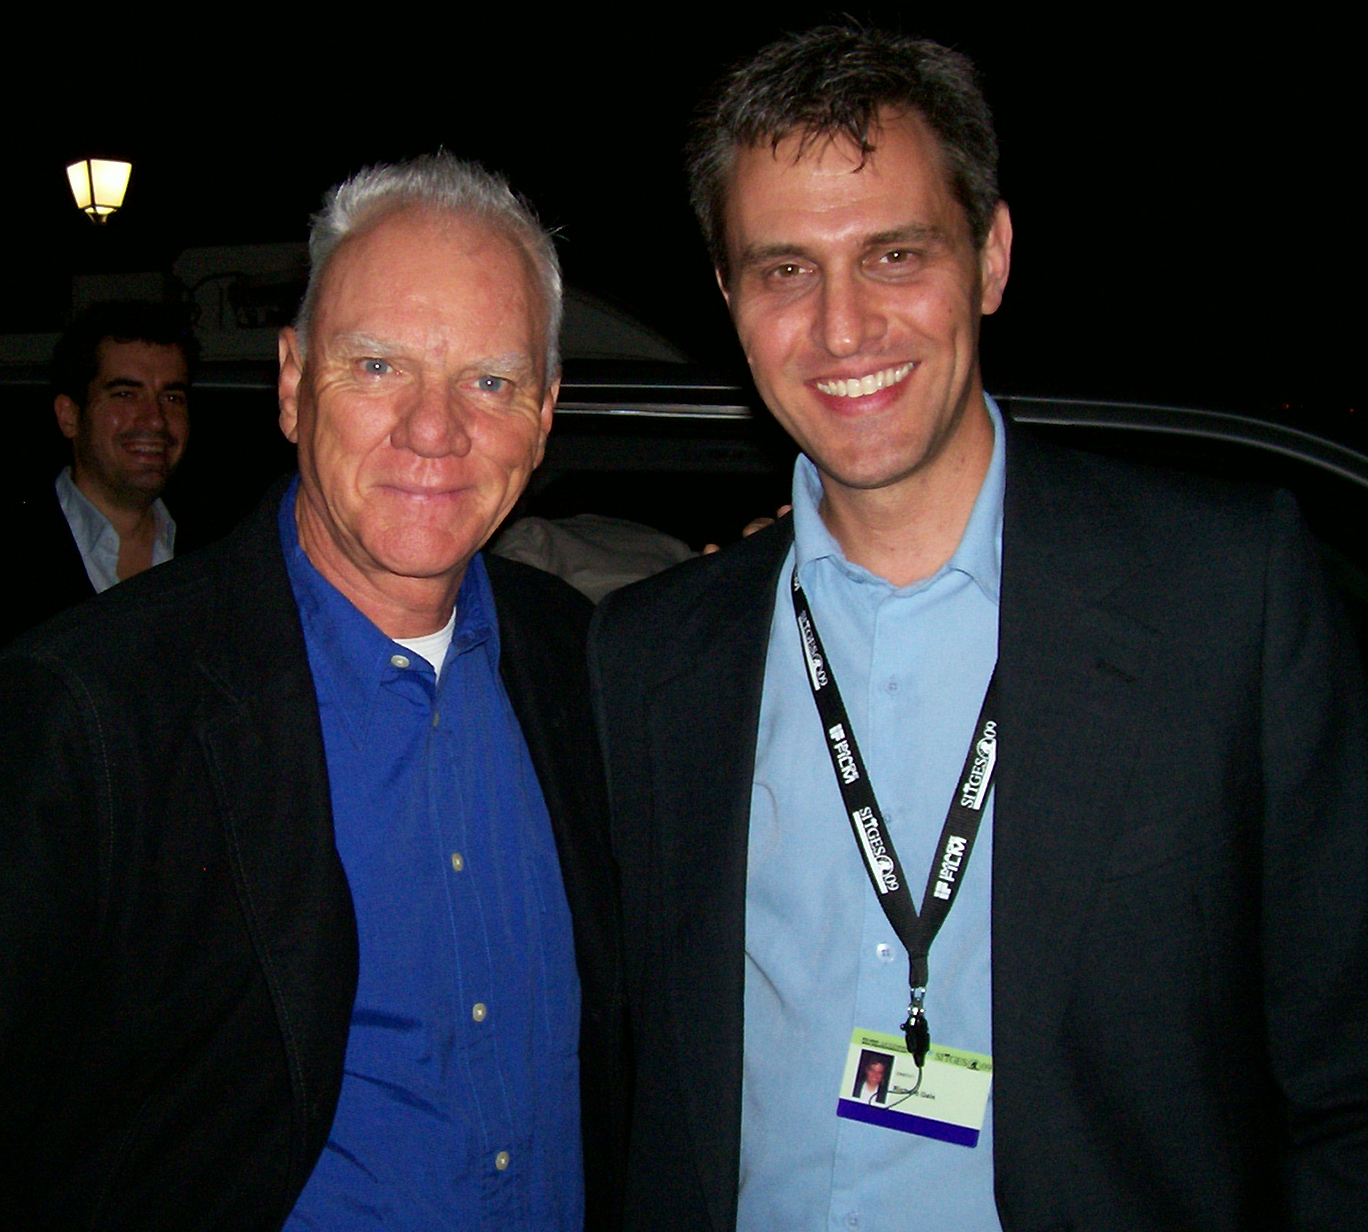 Malcolm McDowell and Richard Gale at the Sitges Film Festival, Spain.